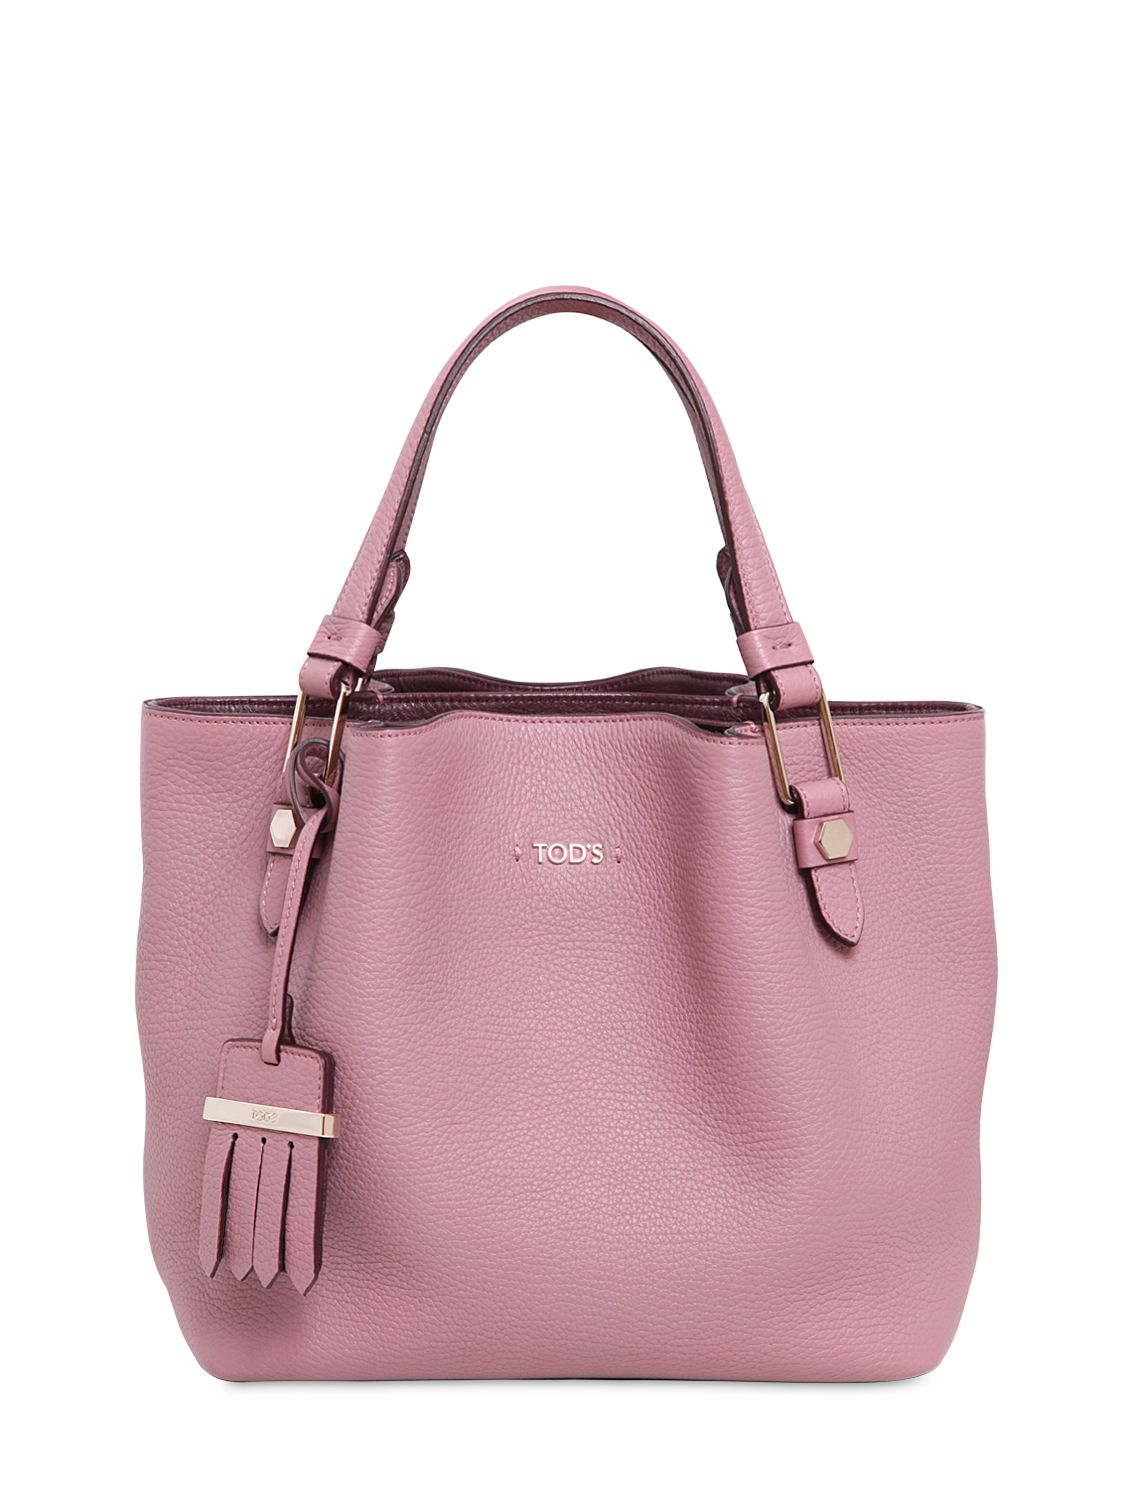 Tod's Small Flower Grained Leather Bag in Pink (PINK/ROSE) | Lyst